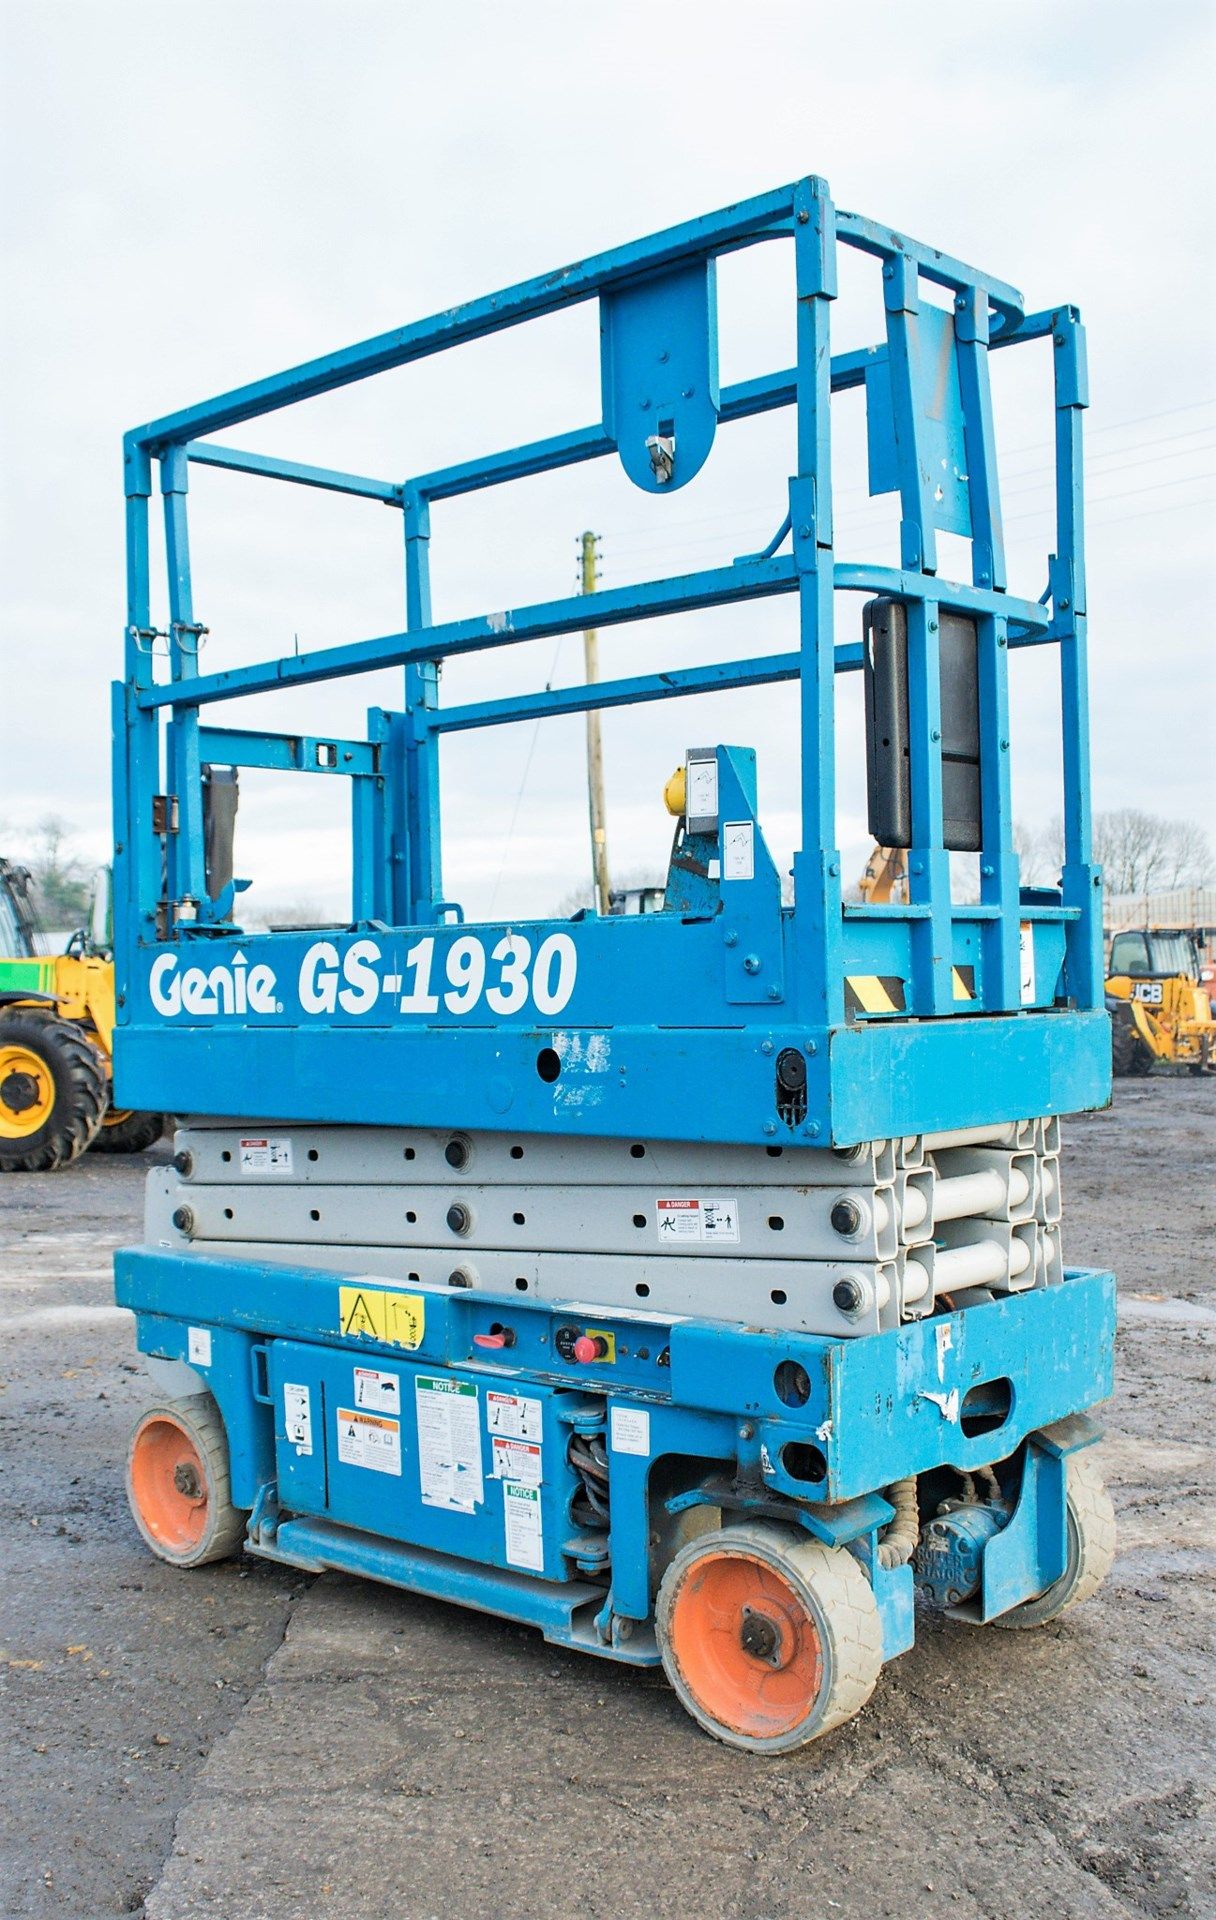 1 x Genie GS-1930 Scissorlift - Fully functional - Max Working Height 7.79m - CL011 - Location: - Image 4 of 8